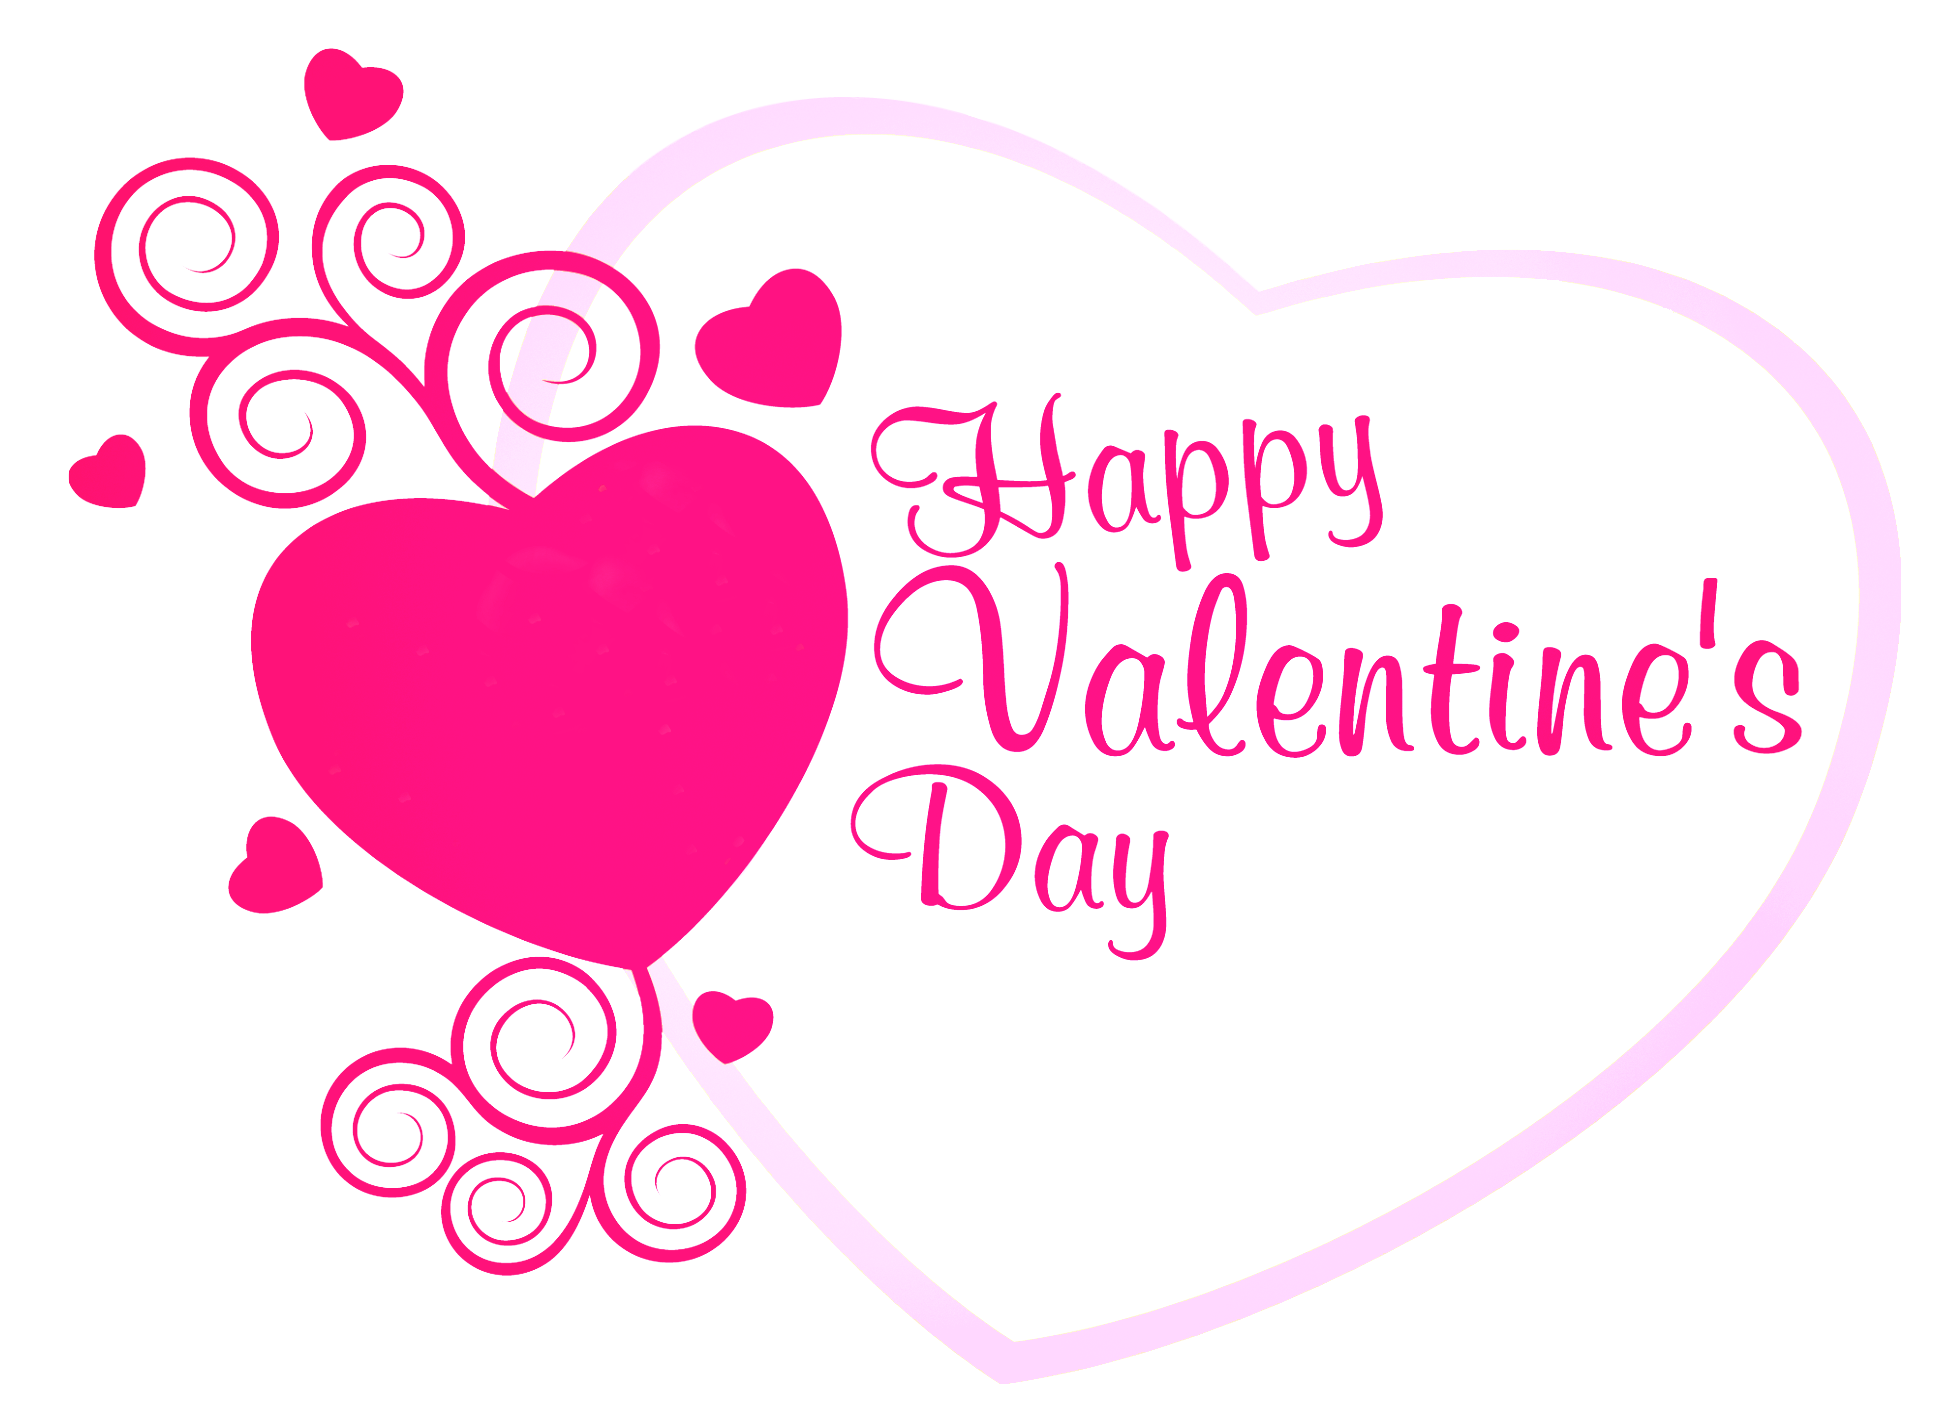 Free Valentines Day Clip Art Pictures - Clipartix